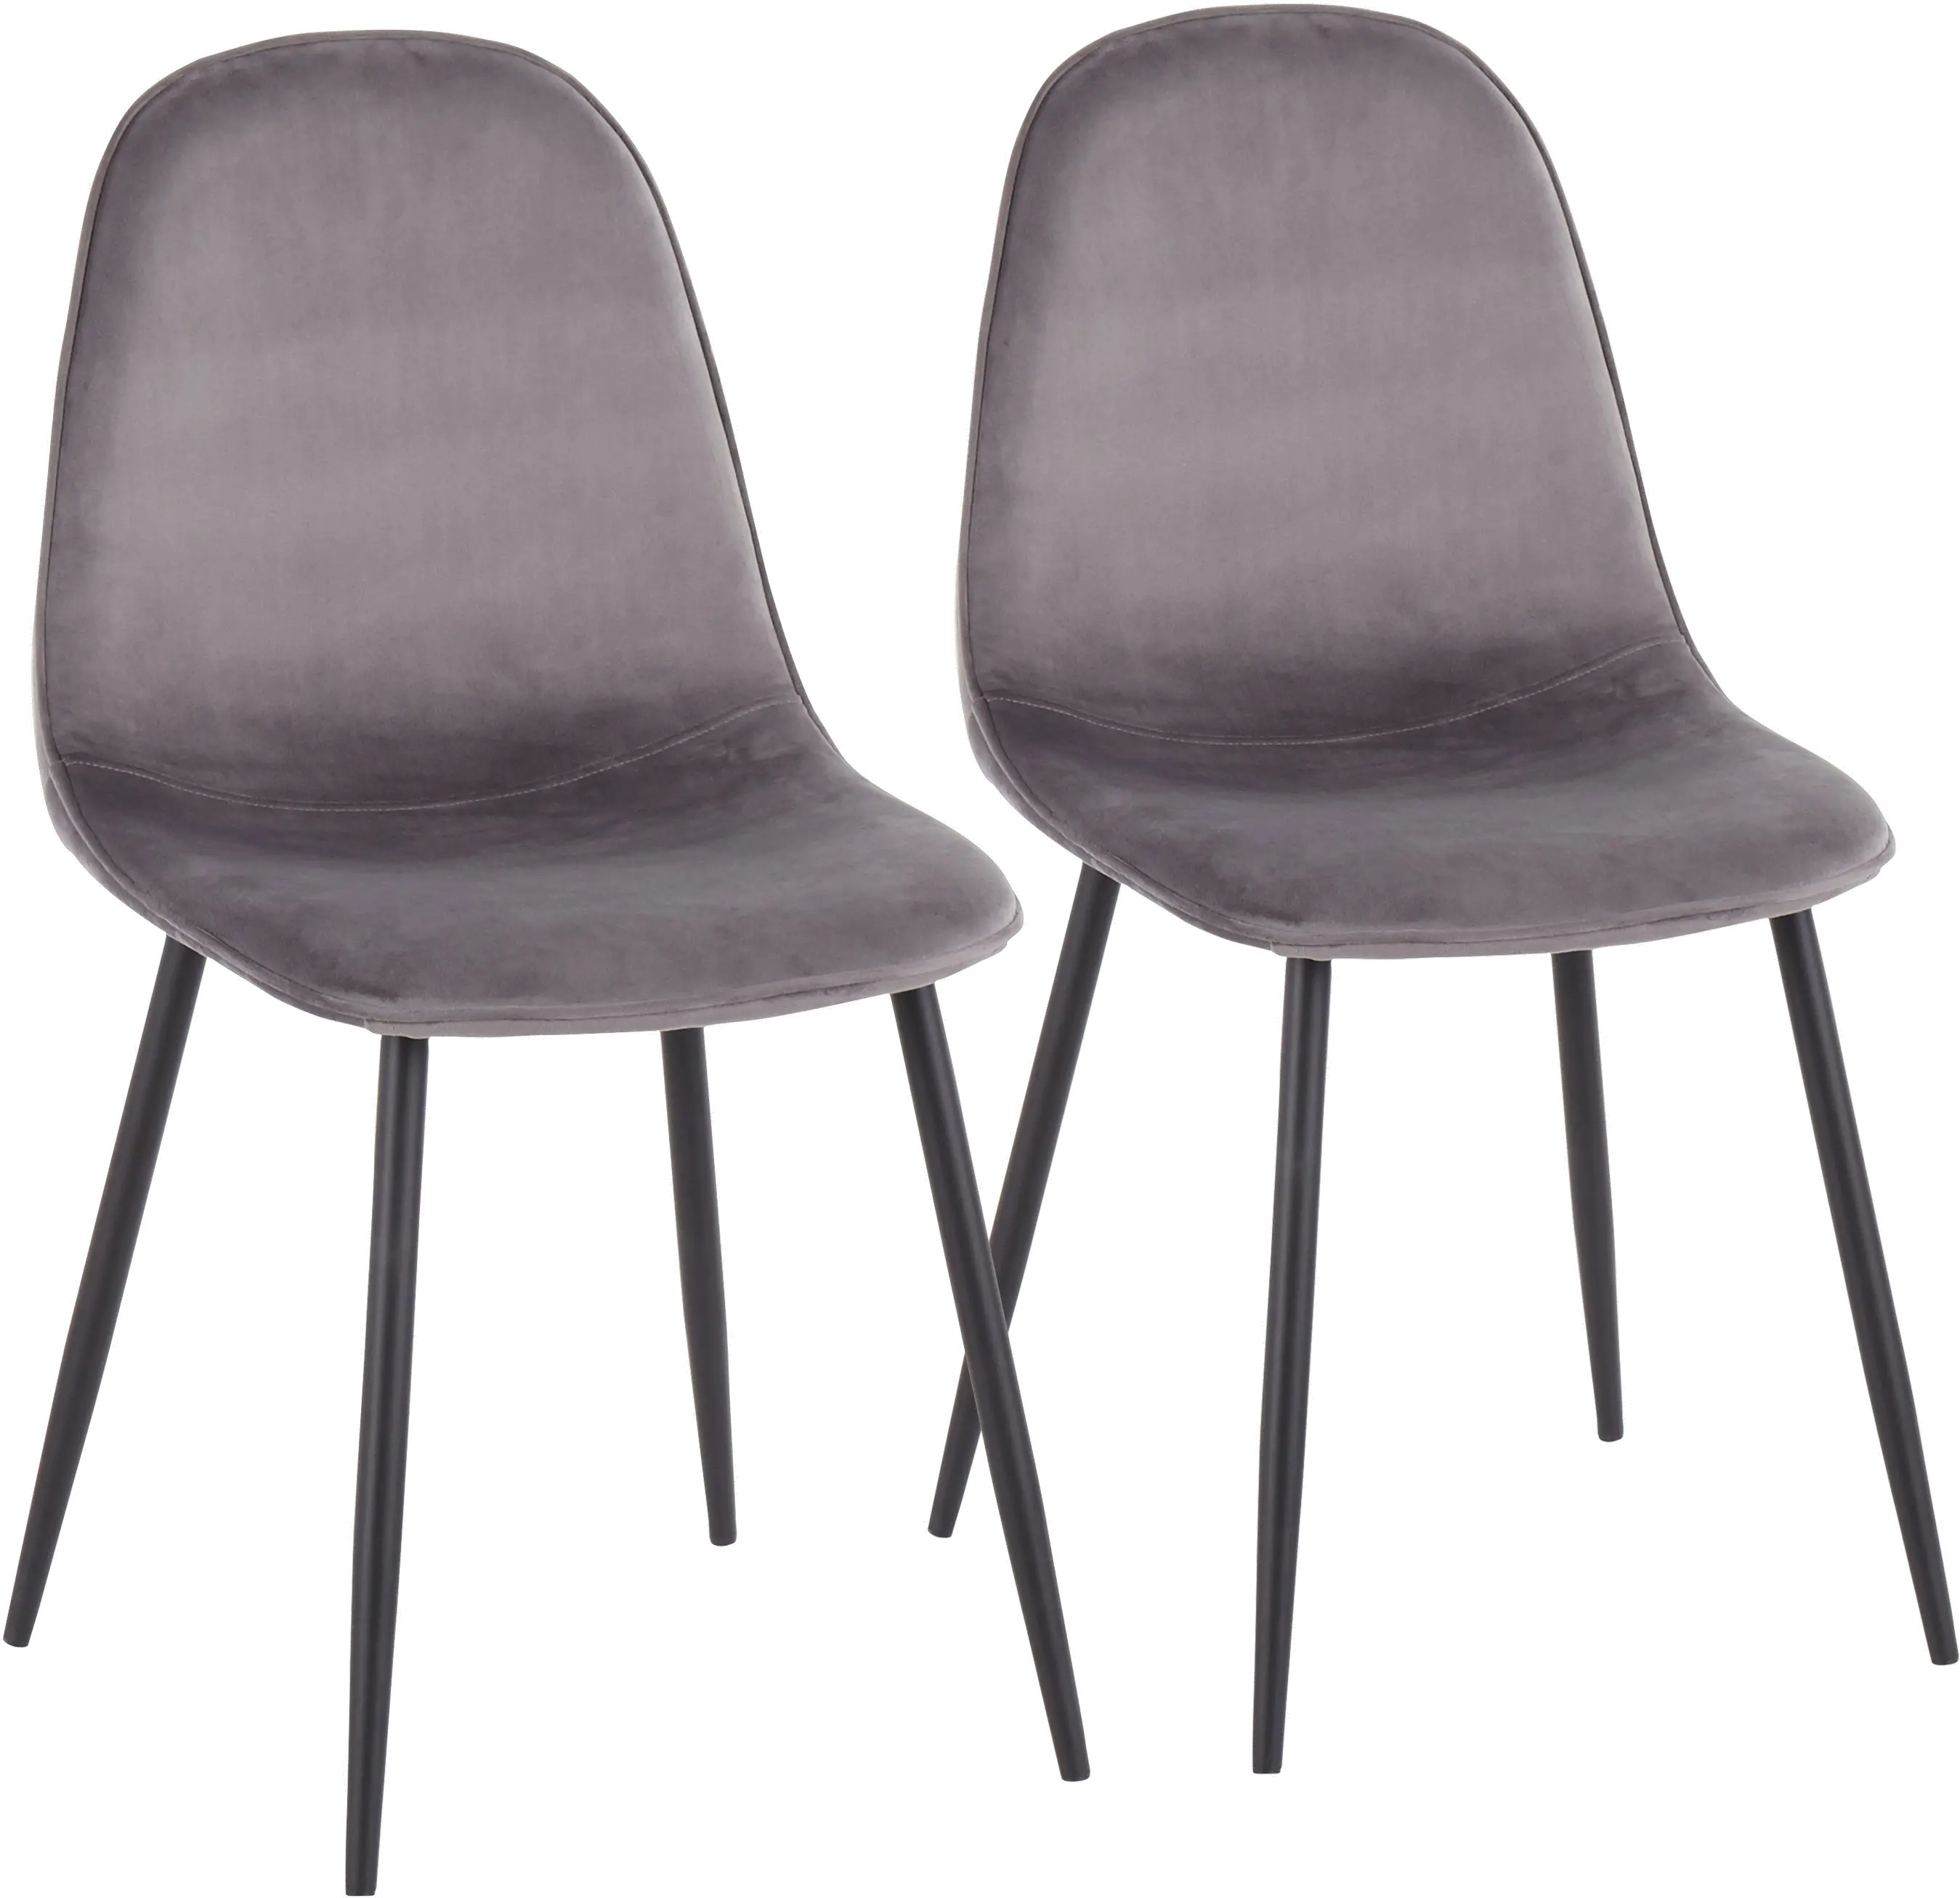 Photos - Chair Lumisource Contemporary Gray and Black Dining Room   - Pebb(Set of 2)